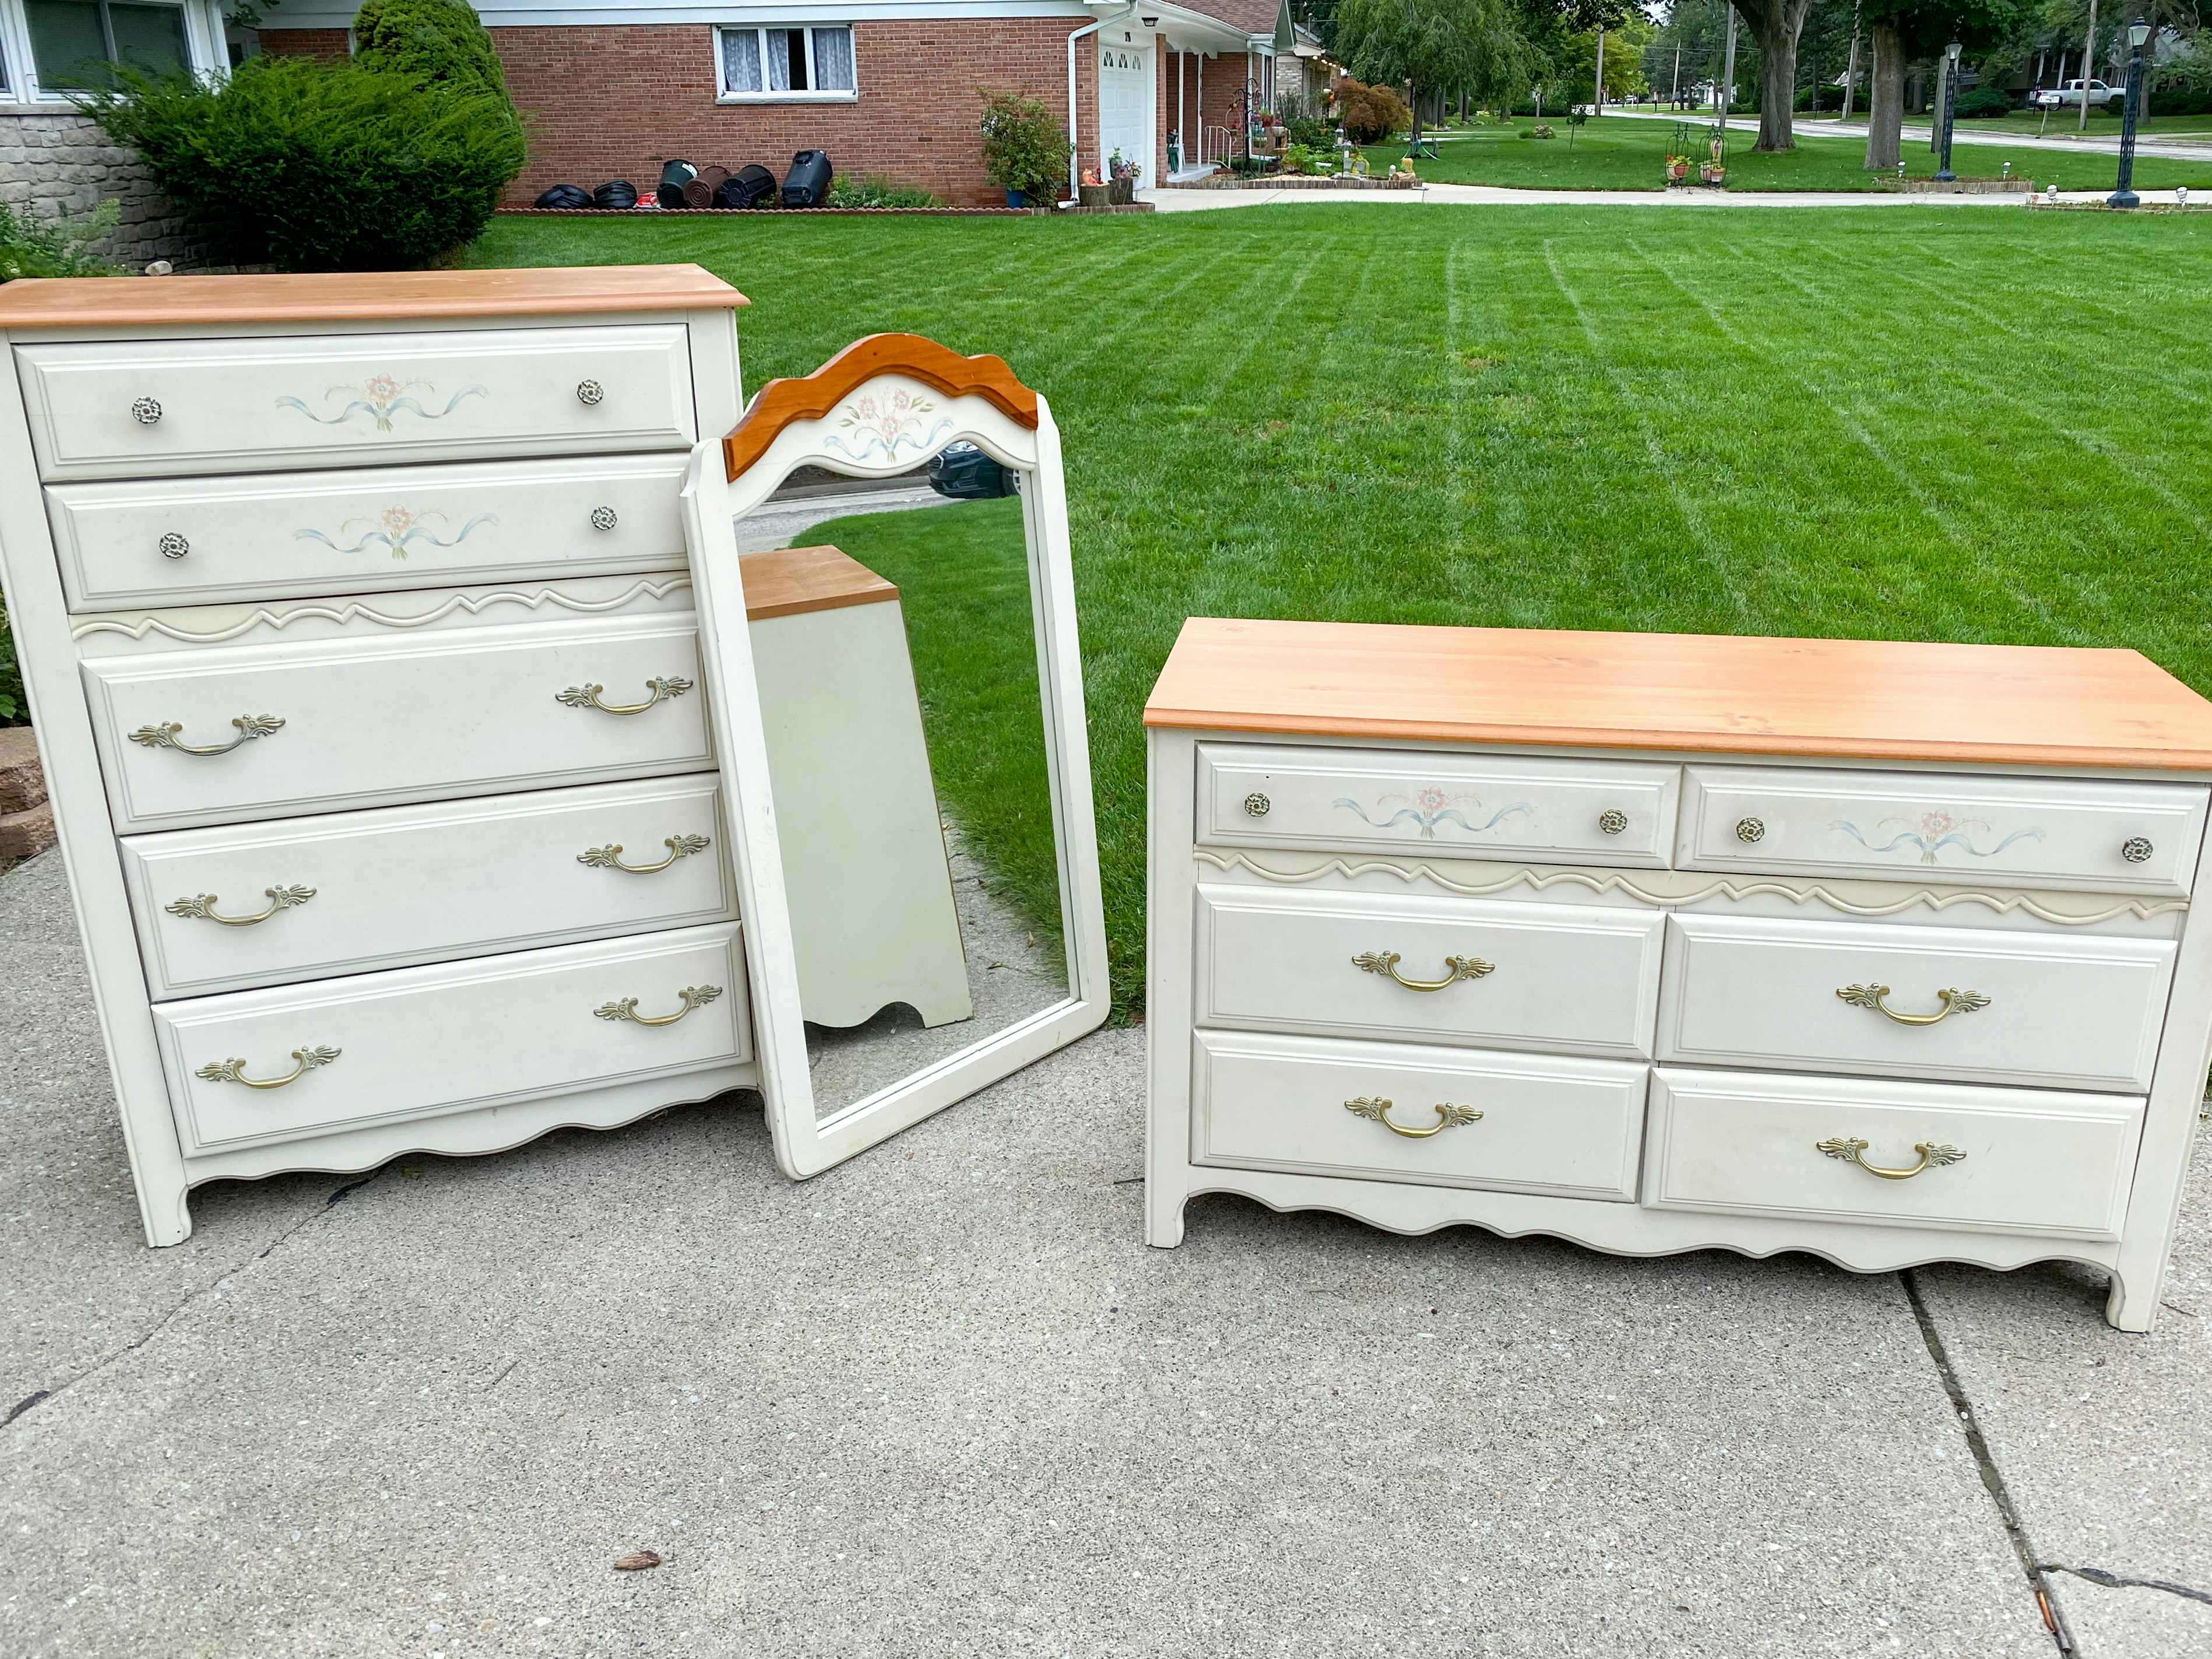 Some furniture for sale at a garage sale